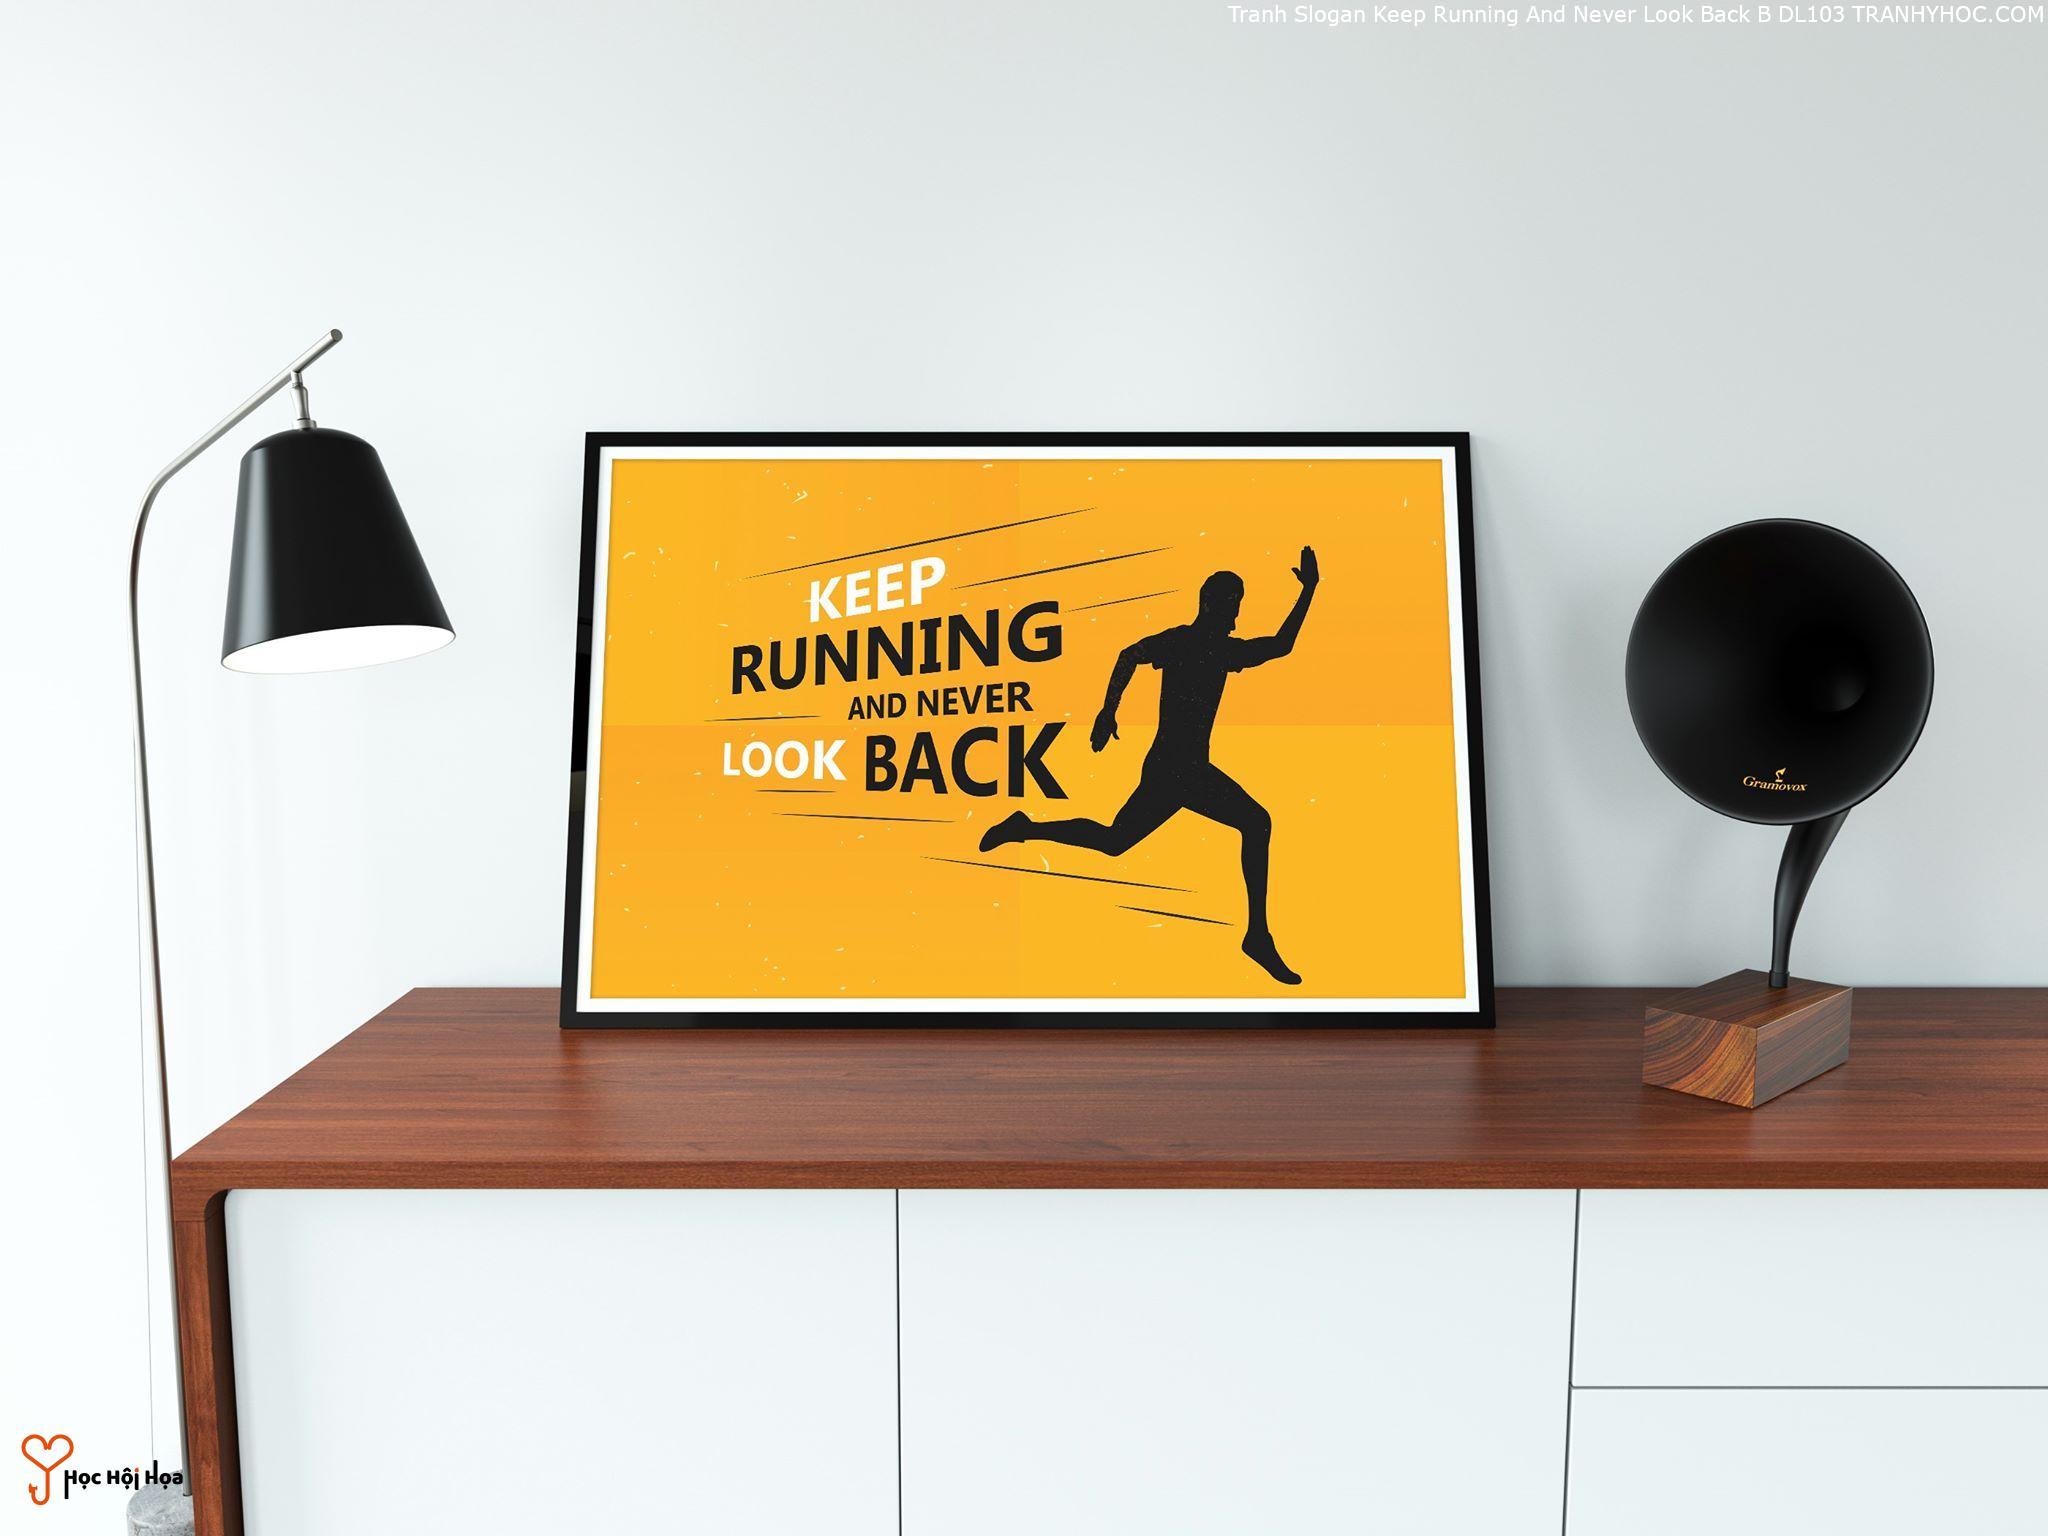 Tranh Slogan Keep Running And Never Look Back B DL103